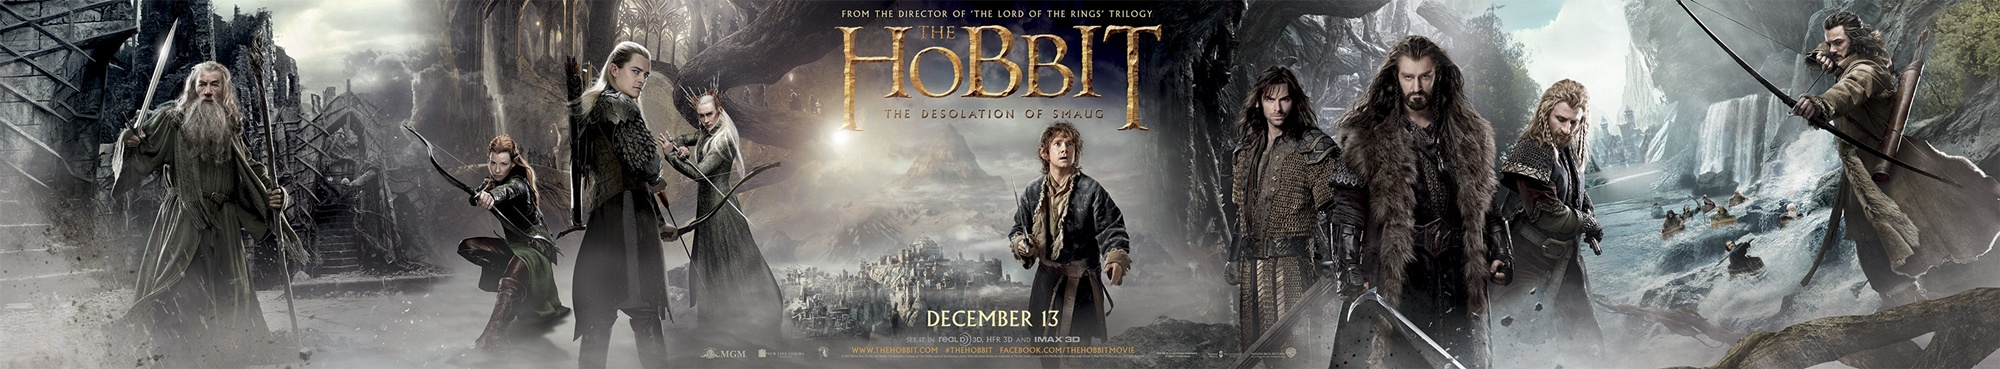 Poster of Warner Bros. Pictures' The Hobbit: The Desolation of Smaug (2013)